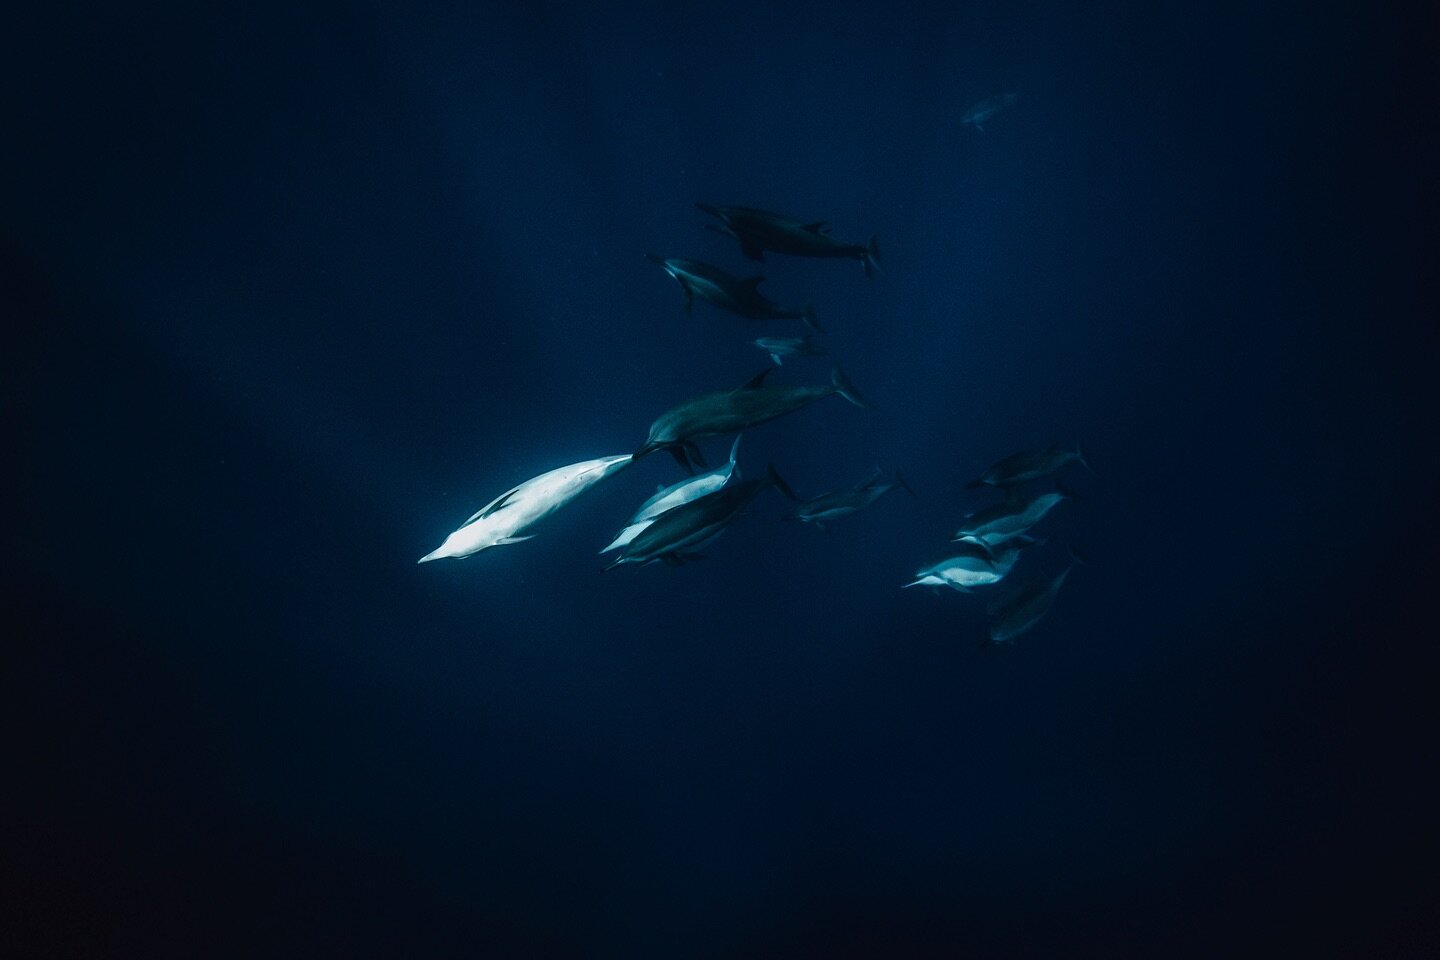 &lsquo;Depth&rsquo;

Open Edition print, one of many new works on my site www.kristaespino.com 
.
.
.
.
.
#sousmarine #underwater #underwaterphotography #dolphins #sealovers #fineartphotography